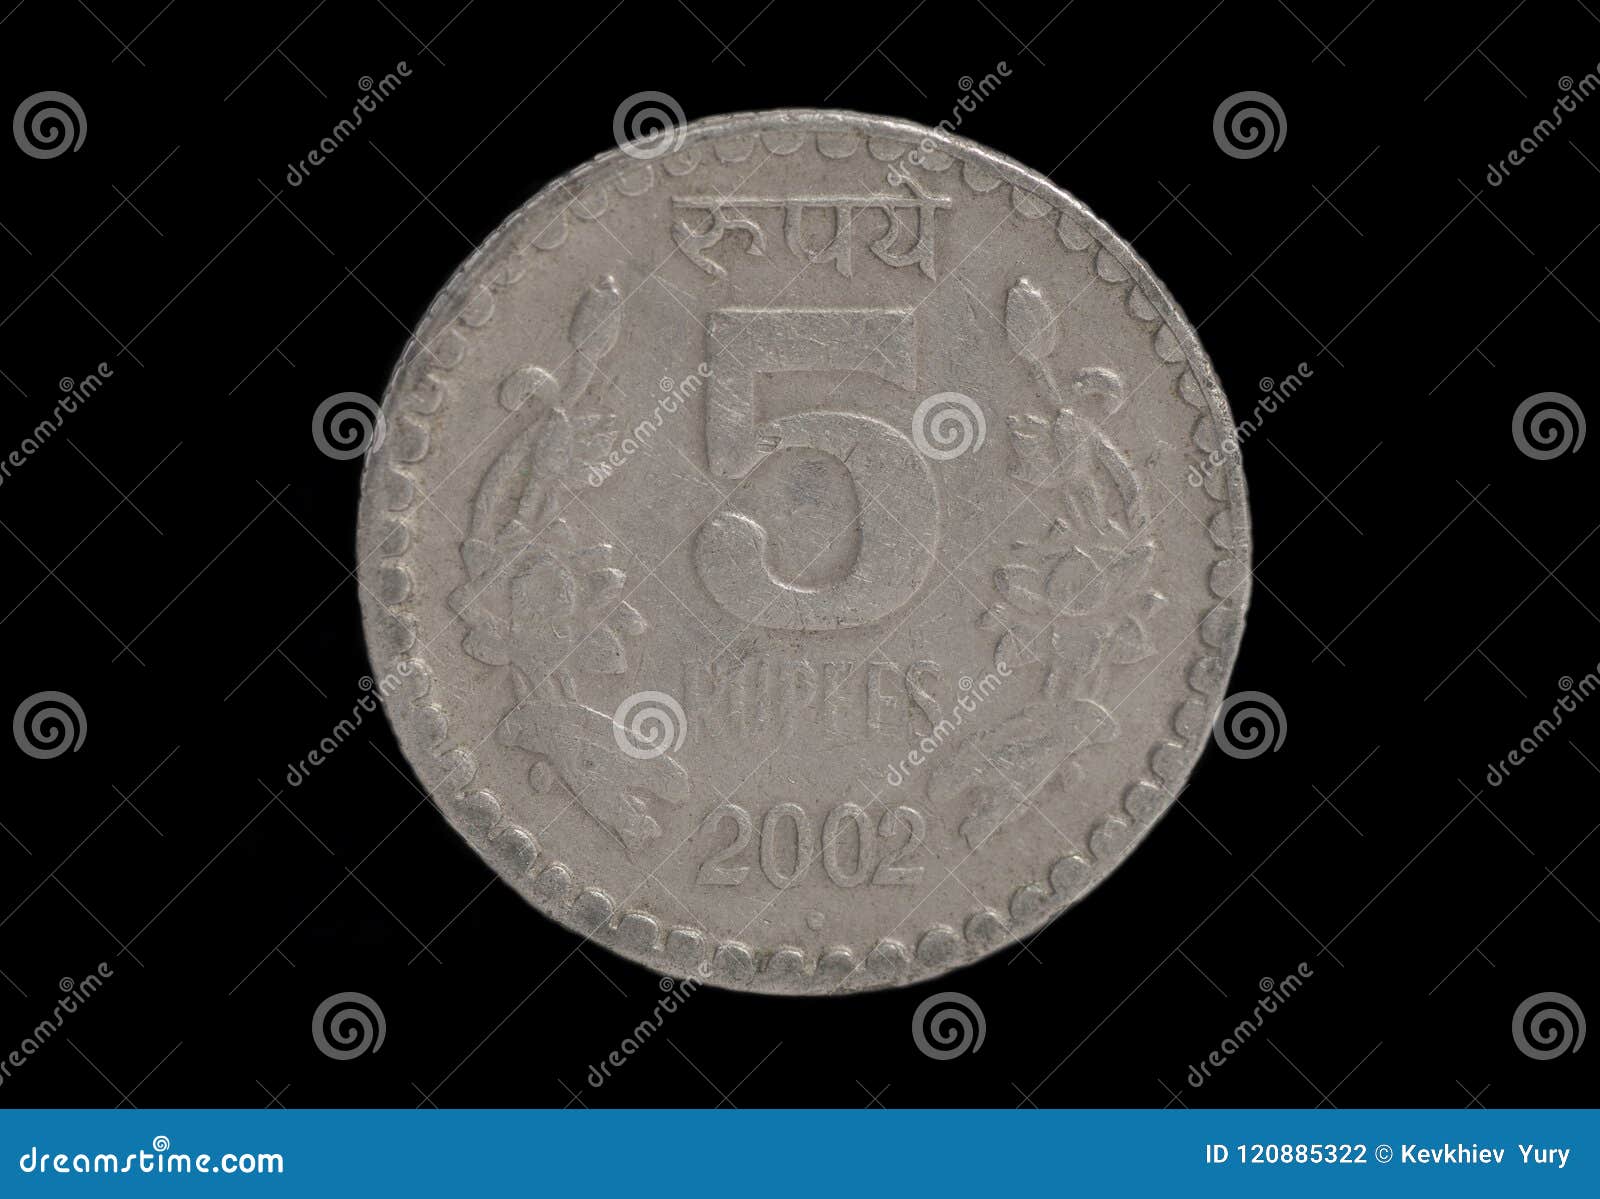 Five Indian Rupee Coin stock photo. Image of economy - 120885322